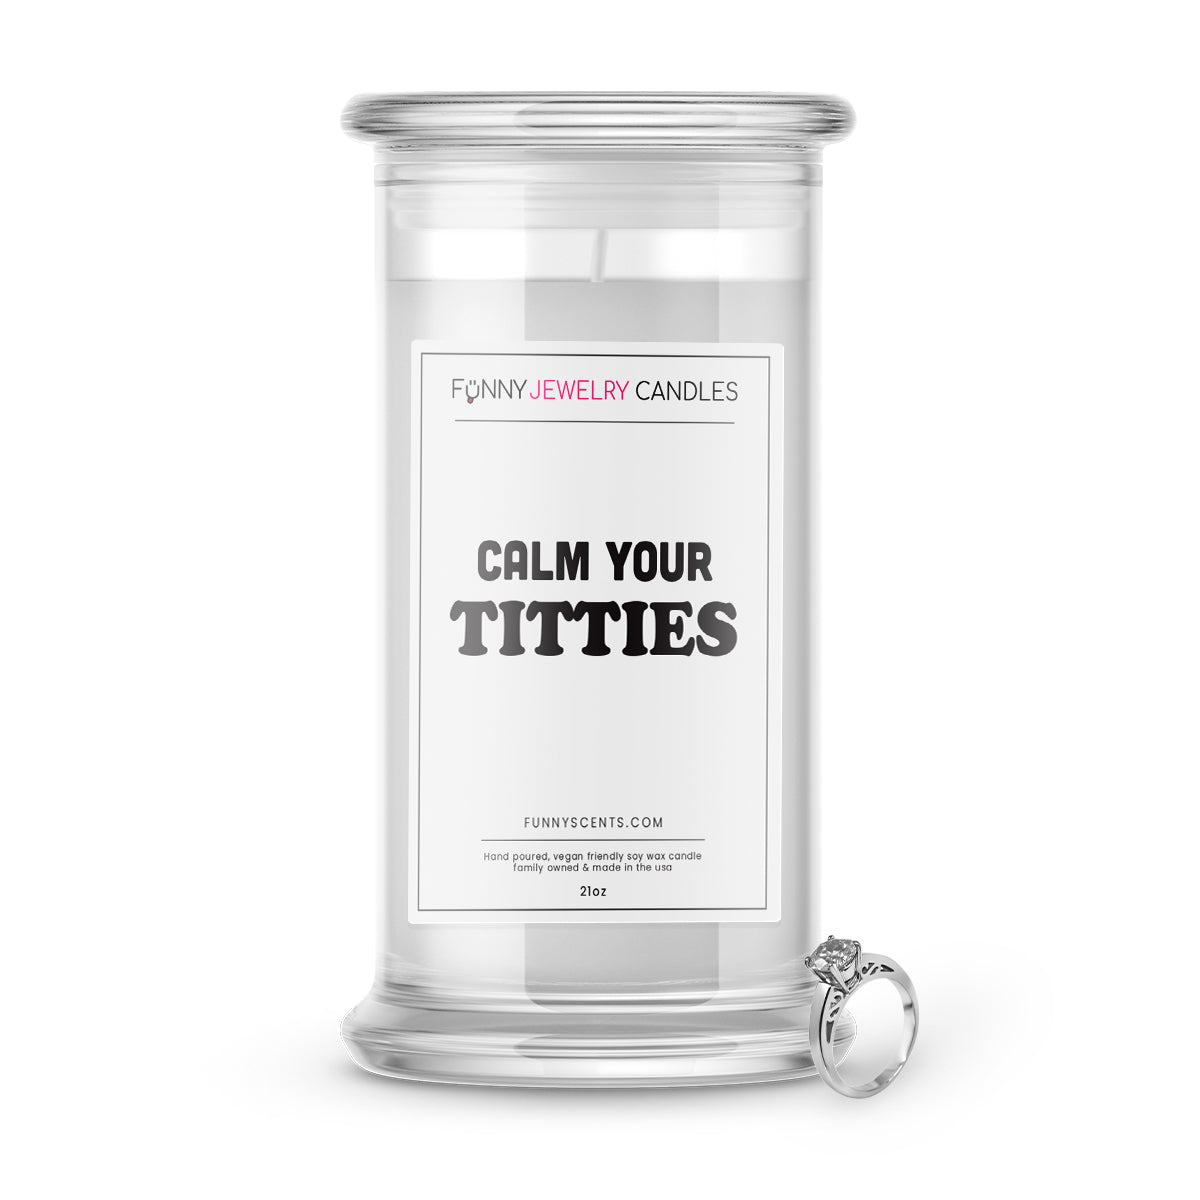 Calm Your Titties Jewelry Funny Candles